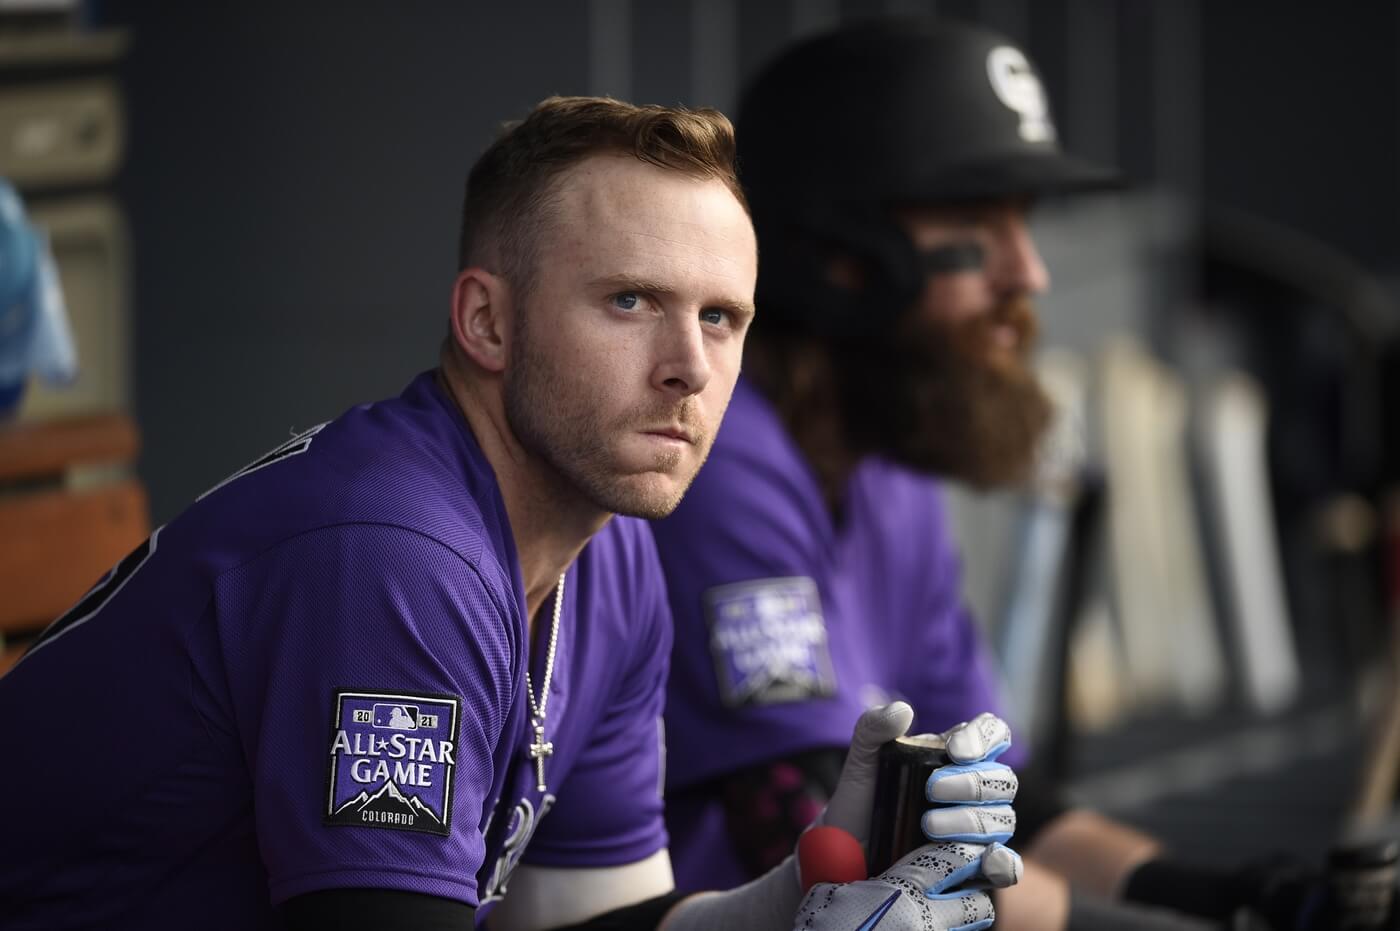 Jul 23, 2021; Los Angeles, California, USA; Colorado Rockies shortstop Trevor Story (27) looks on from the dugout in front of right fielder Charlie Blackmon (19) prior to the game against the Los Angeles Dodgers at Dodger Stadium. Mandatory Credit: Kelvin Kuo-USA TODAY Sports